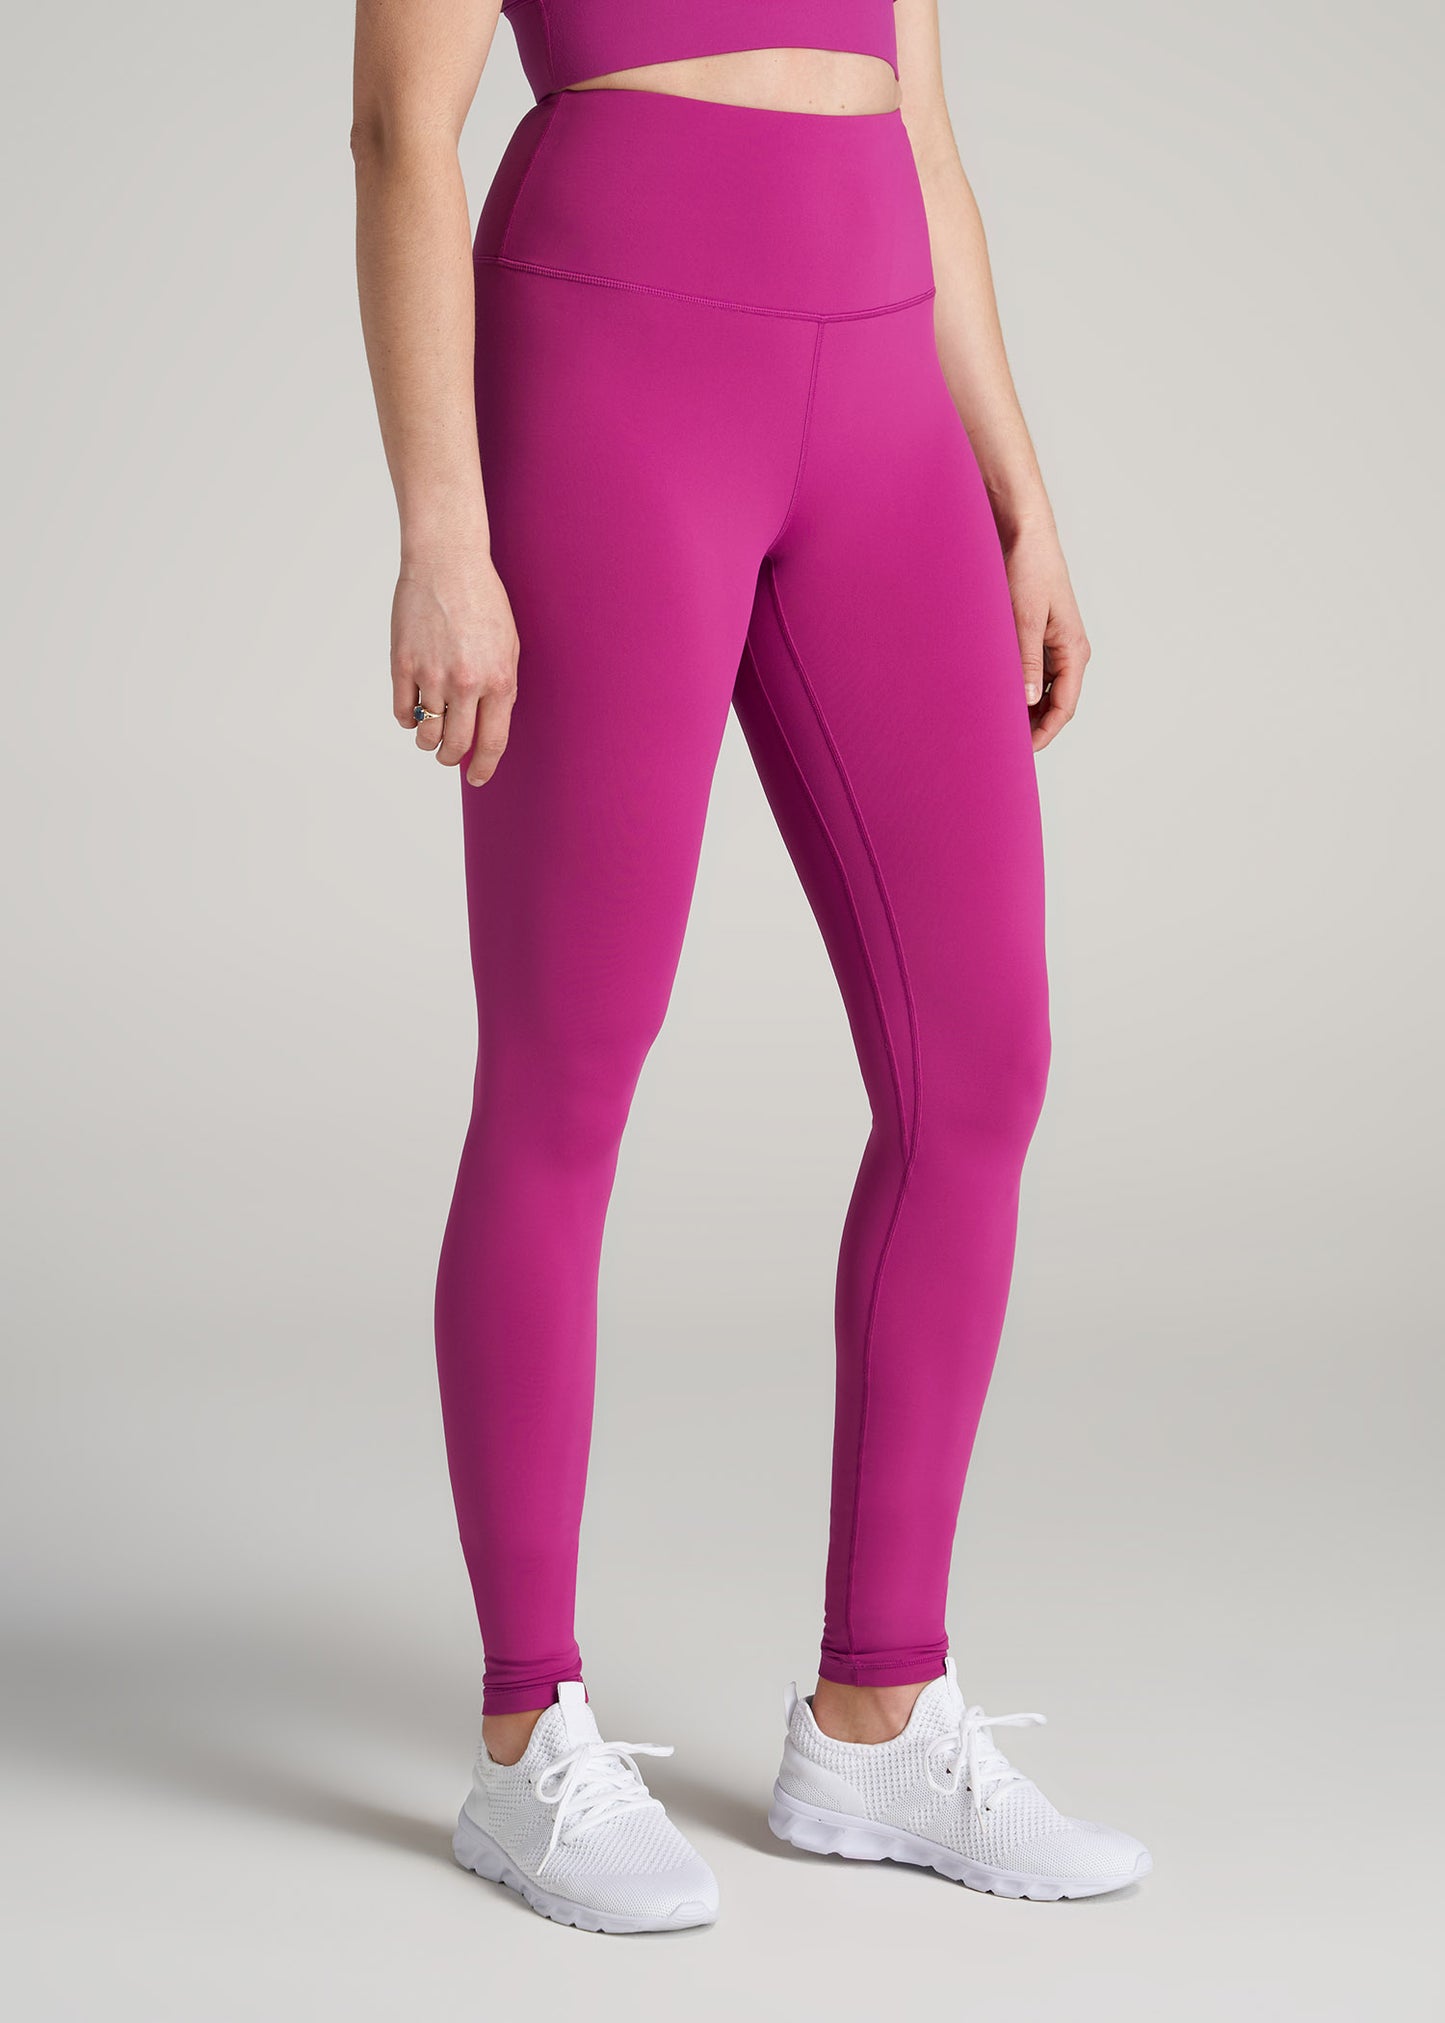 Athleta Inclination Moto Tight Leggings Orchid Pink High Waisted Athletic XL